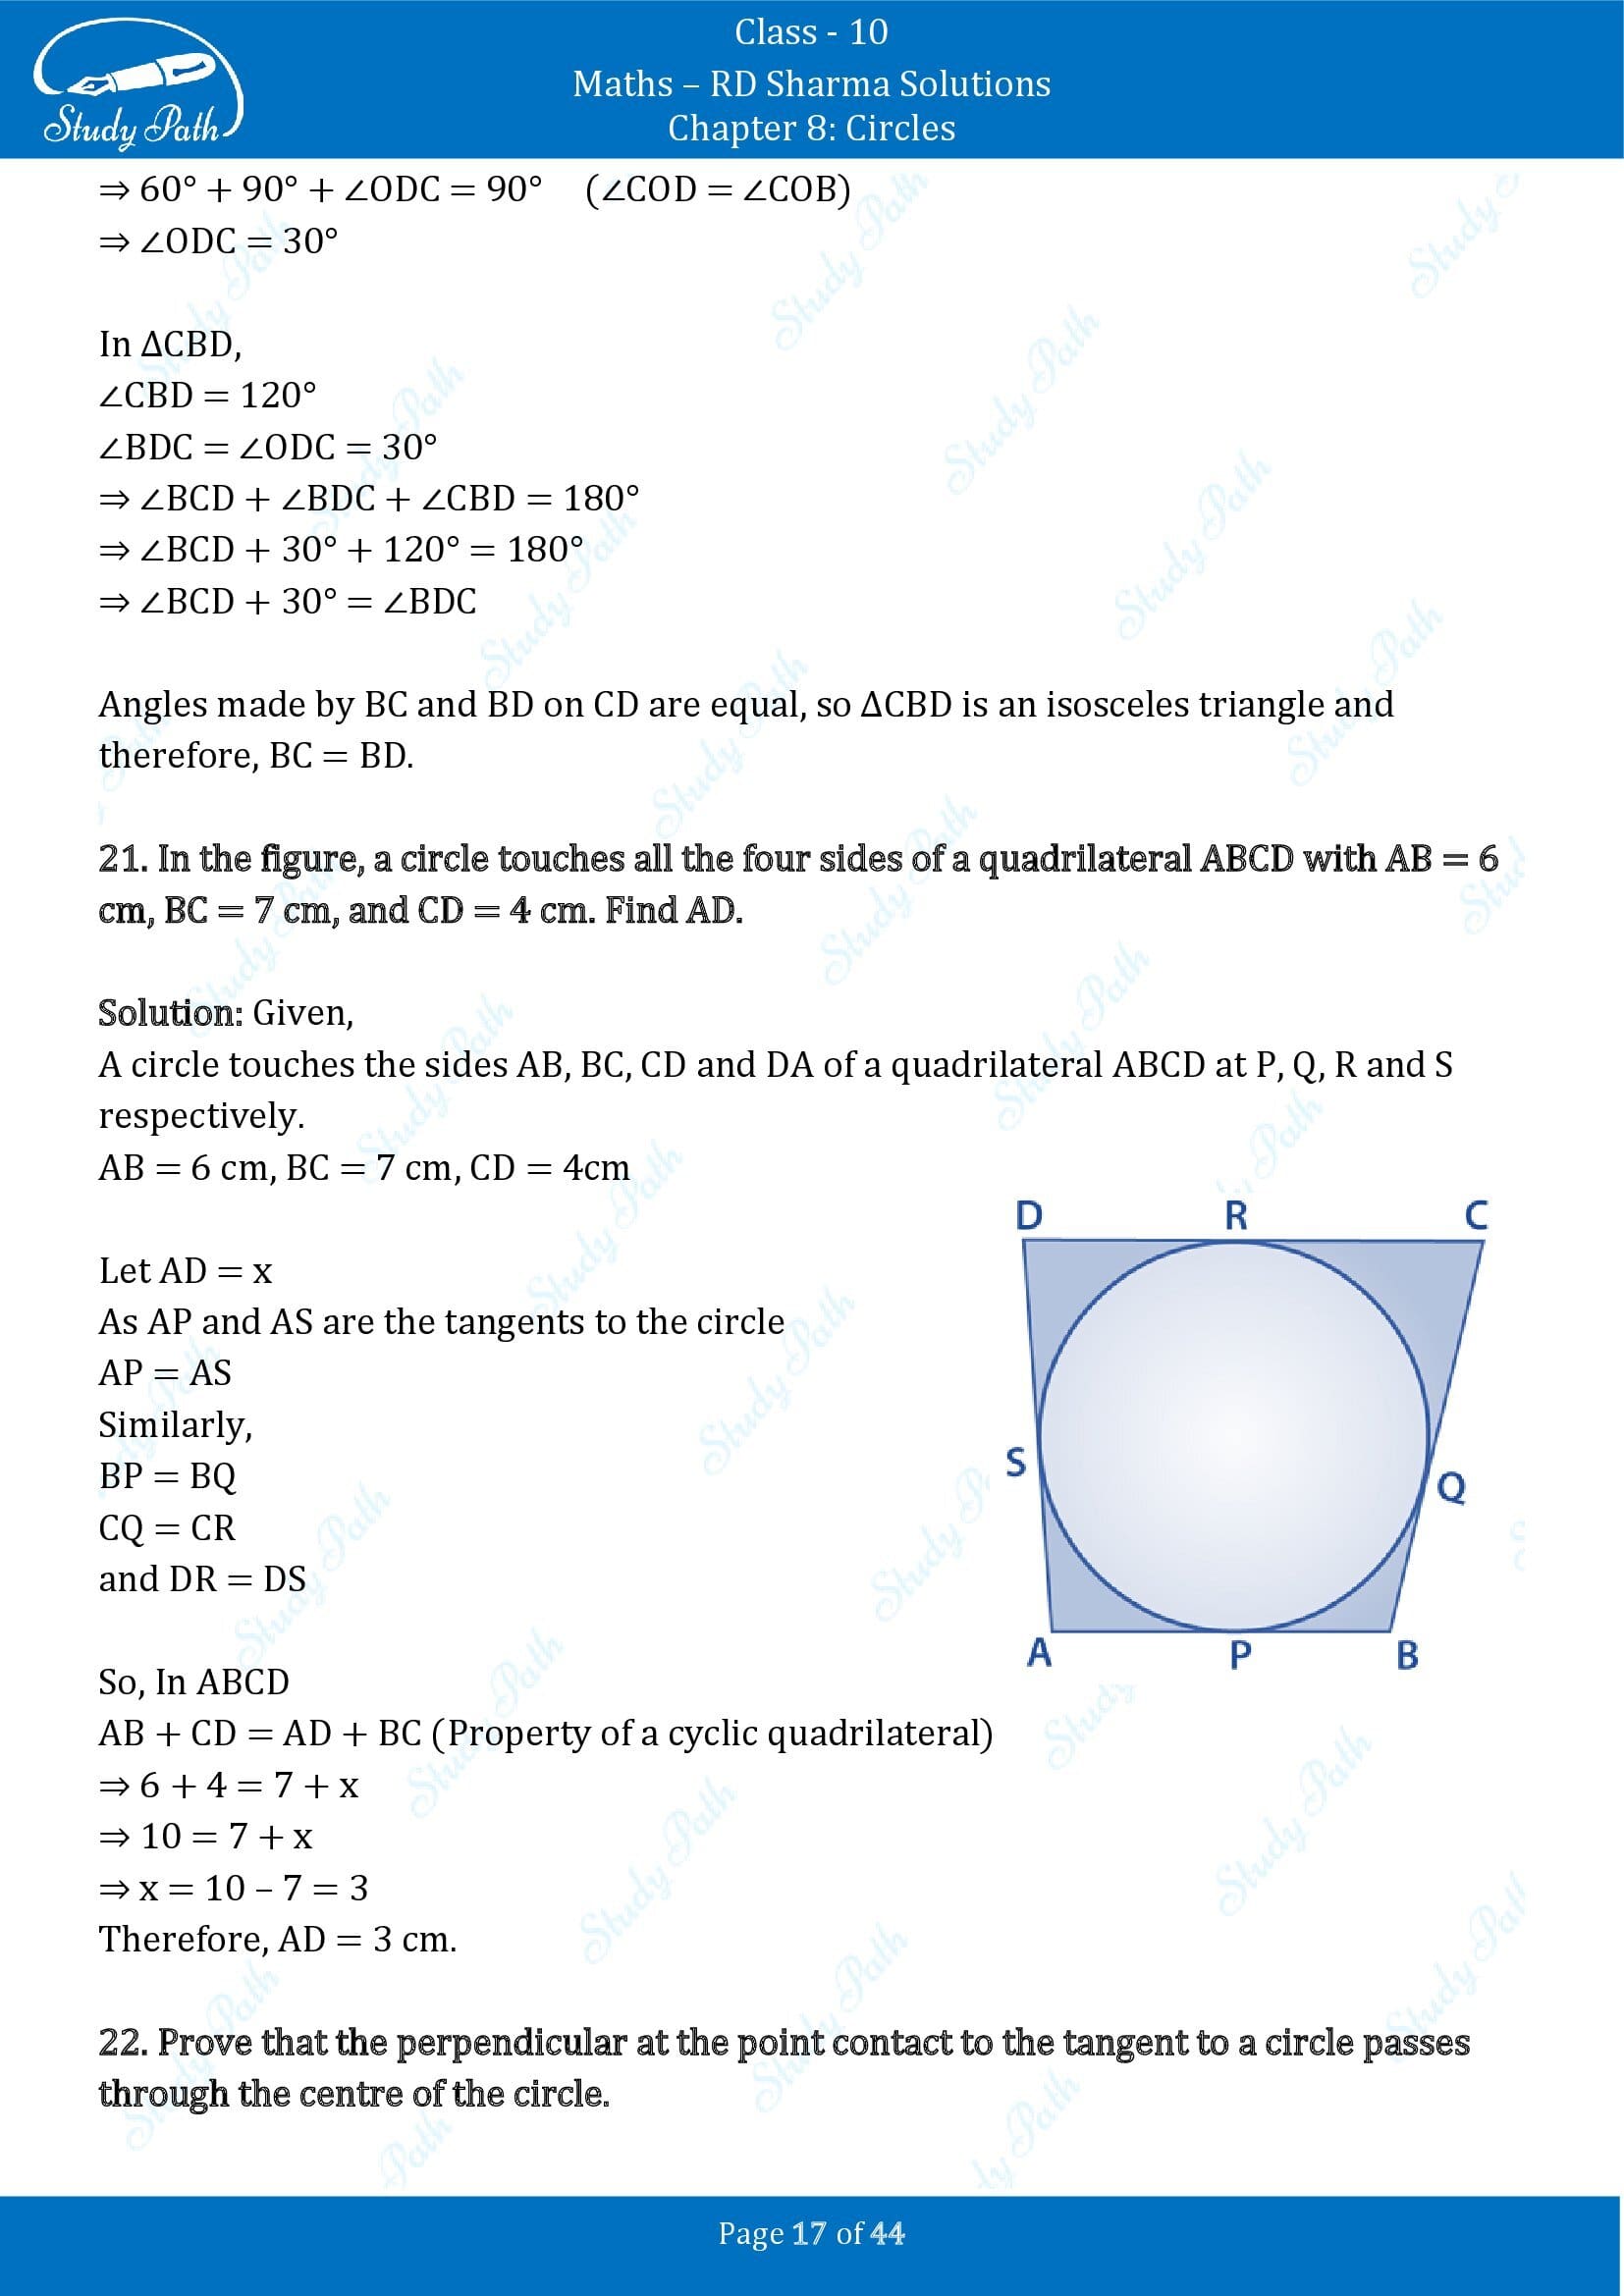 RD Sharma Solutions Class 10 Chapter 8 Circles Exercise 8.2 00017